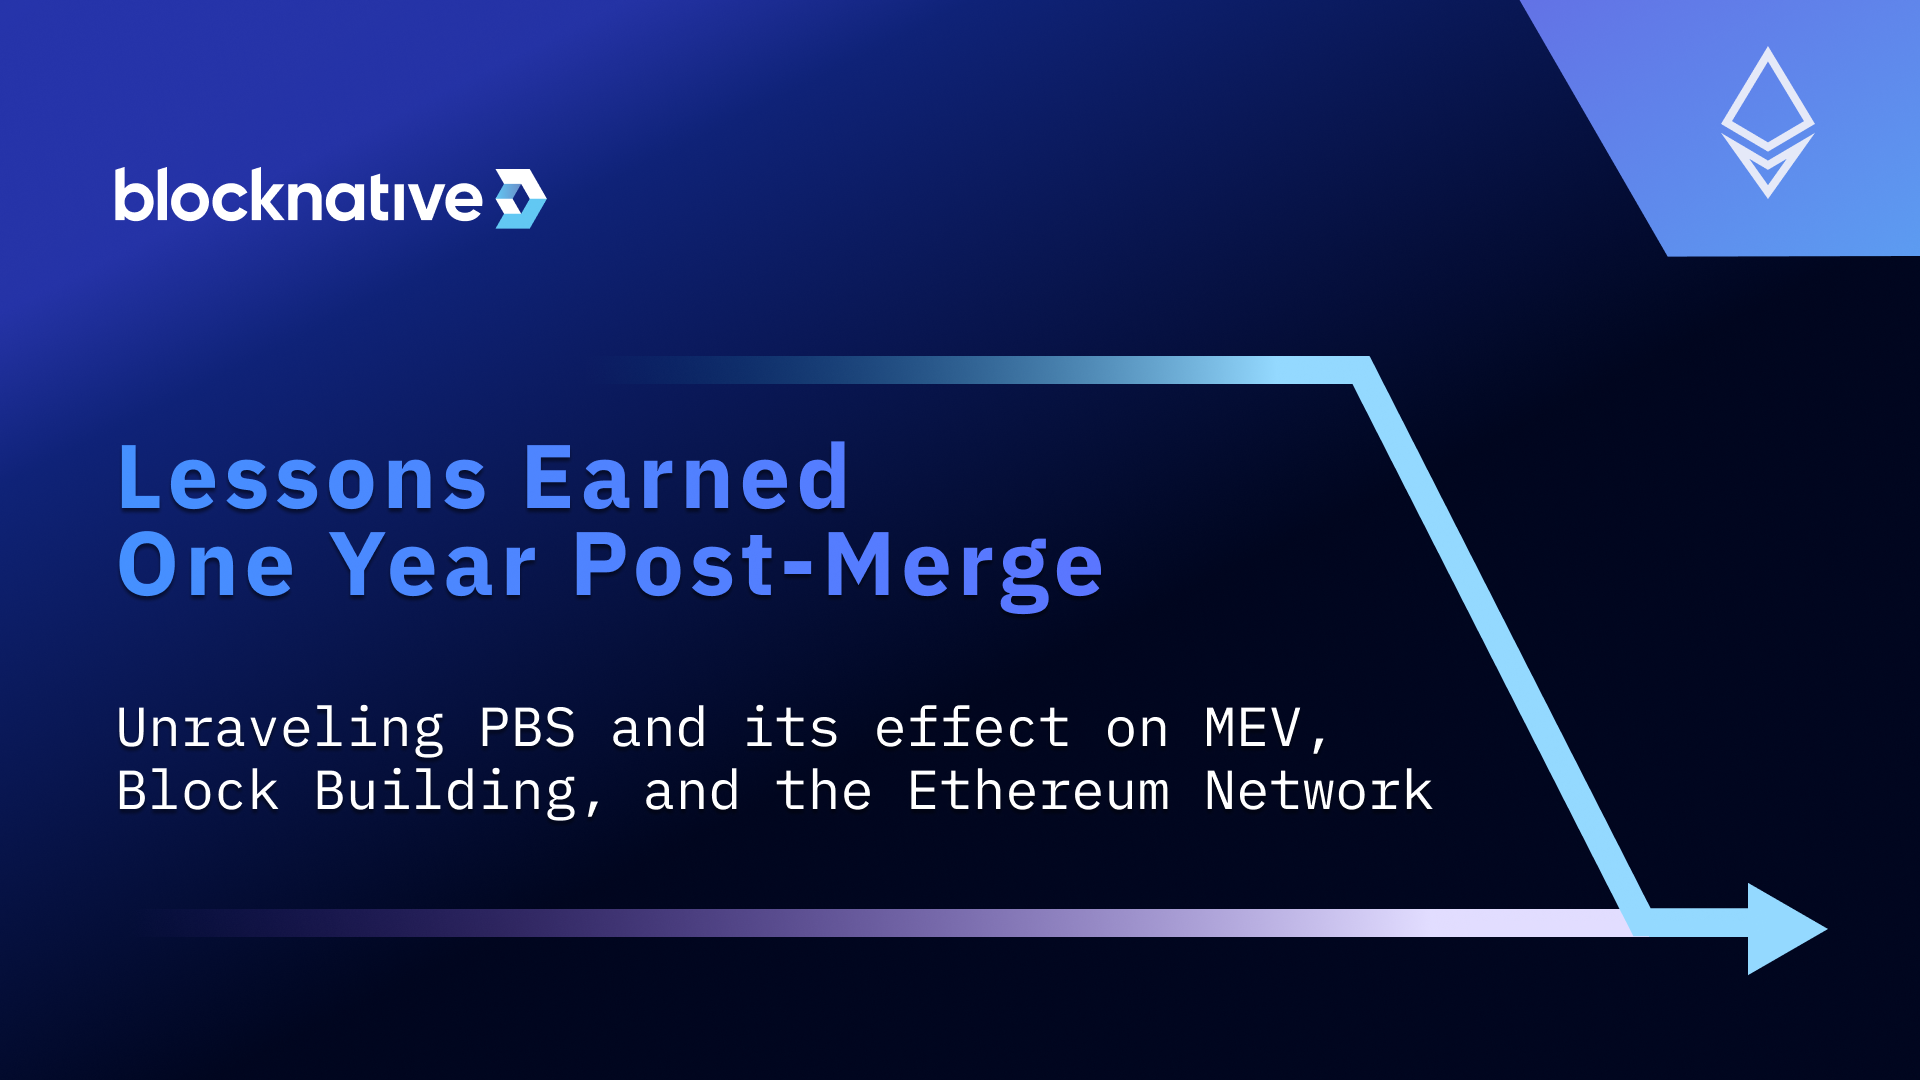 lessons-earned-one-year-post-merge:-unraveling-pbs-and-its-effect-on-mev,-block-building,-and-the-ethereum-network